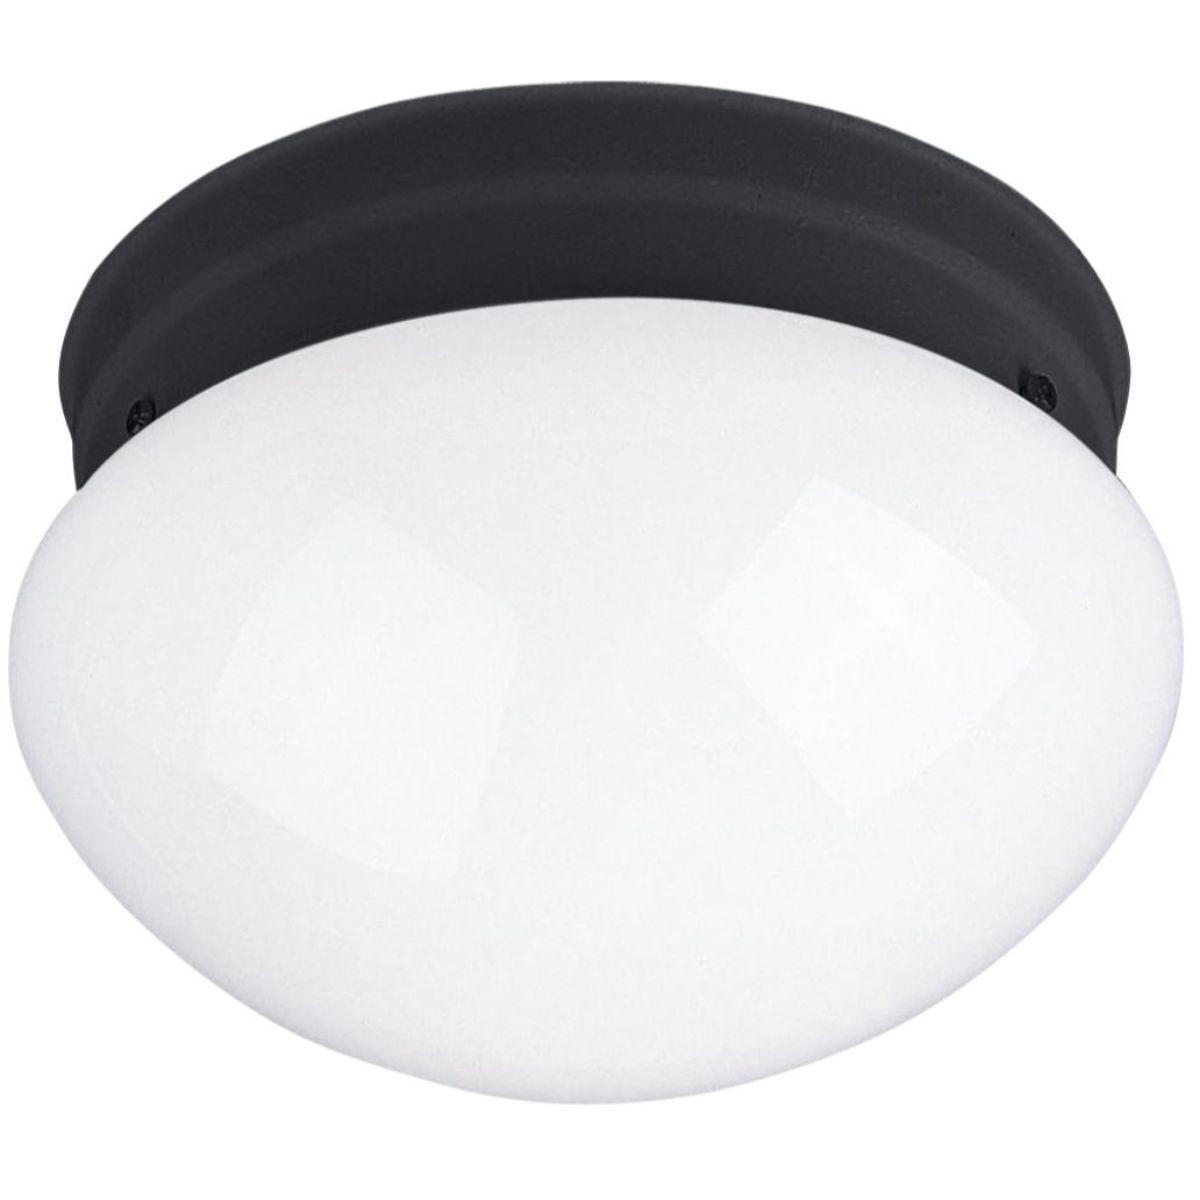 Essentials-588x 8 in. Ceiling Puff Light with clear glass